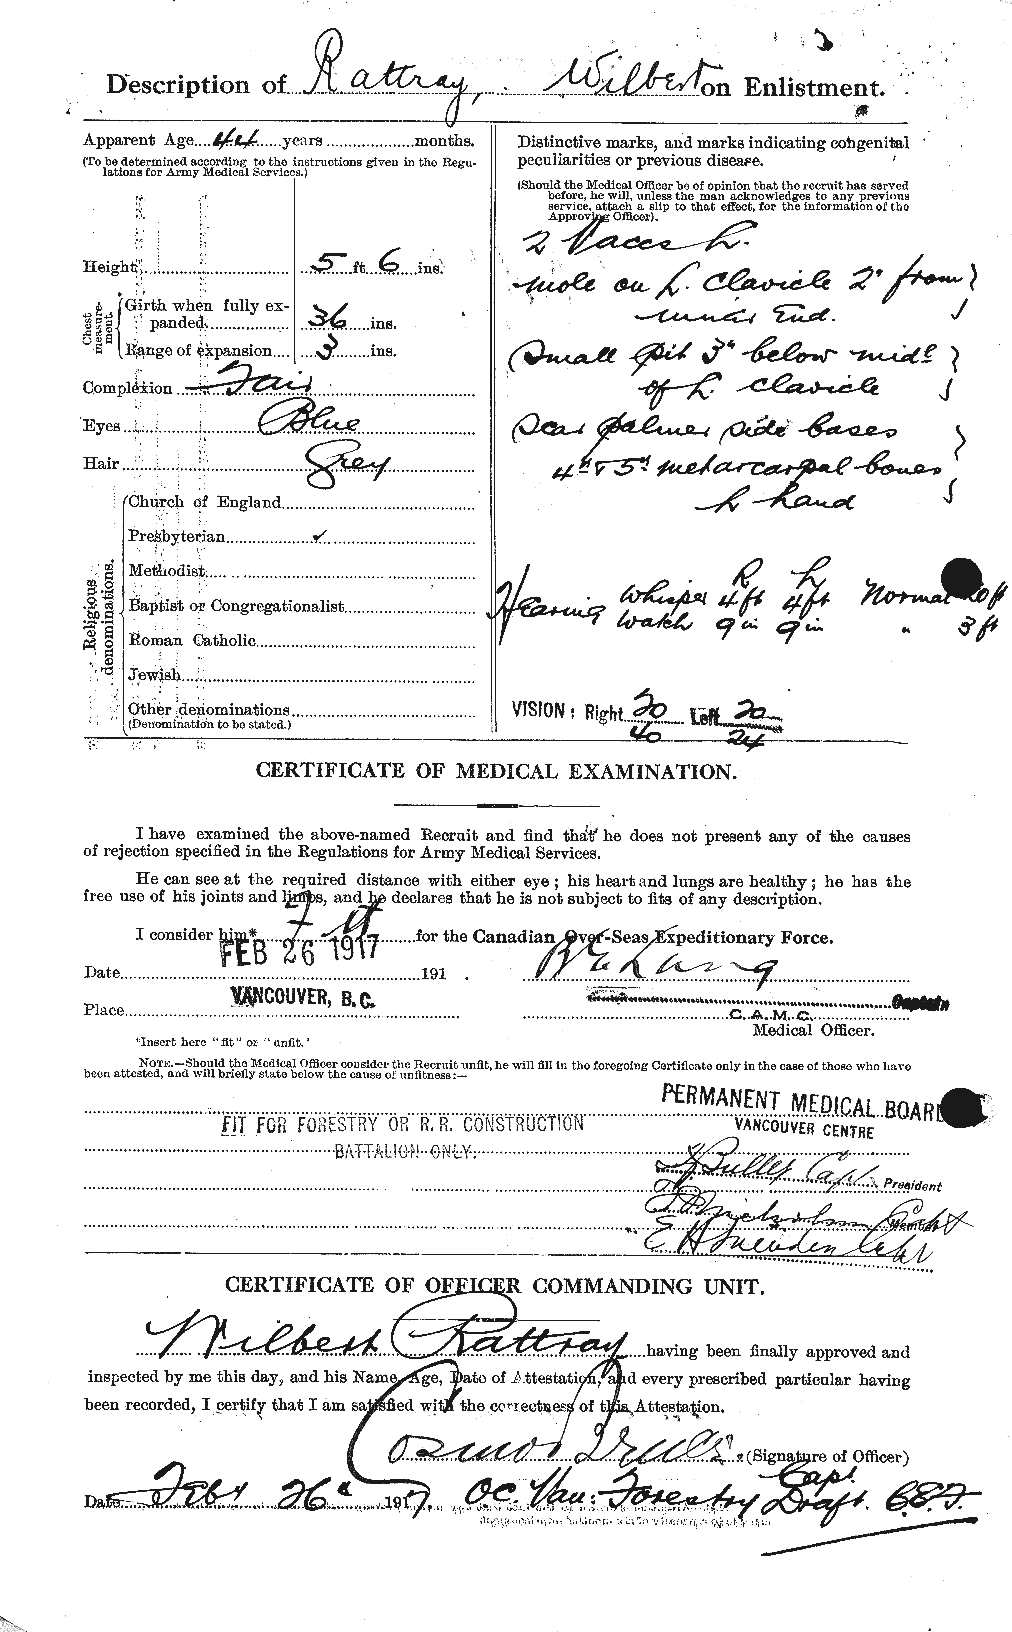 Personnel Records of the First World War - CEF 595708b